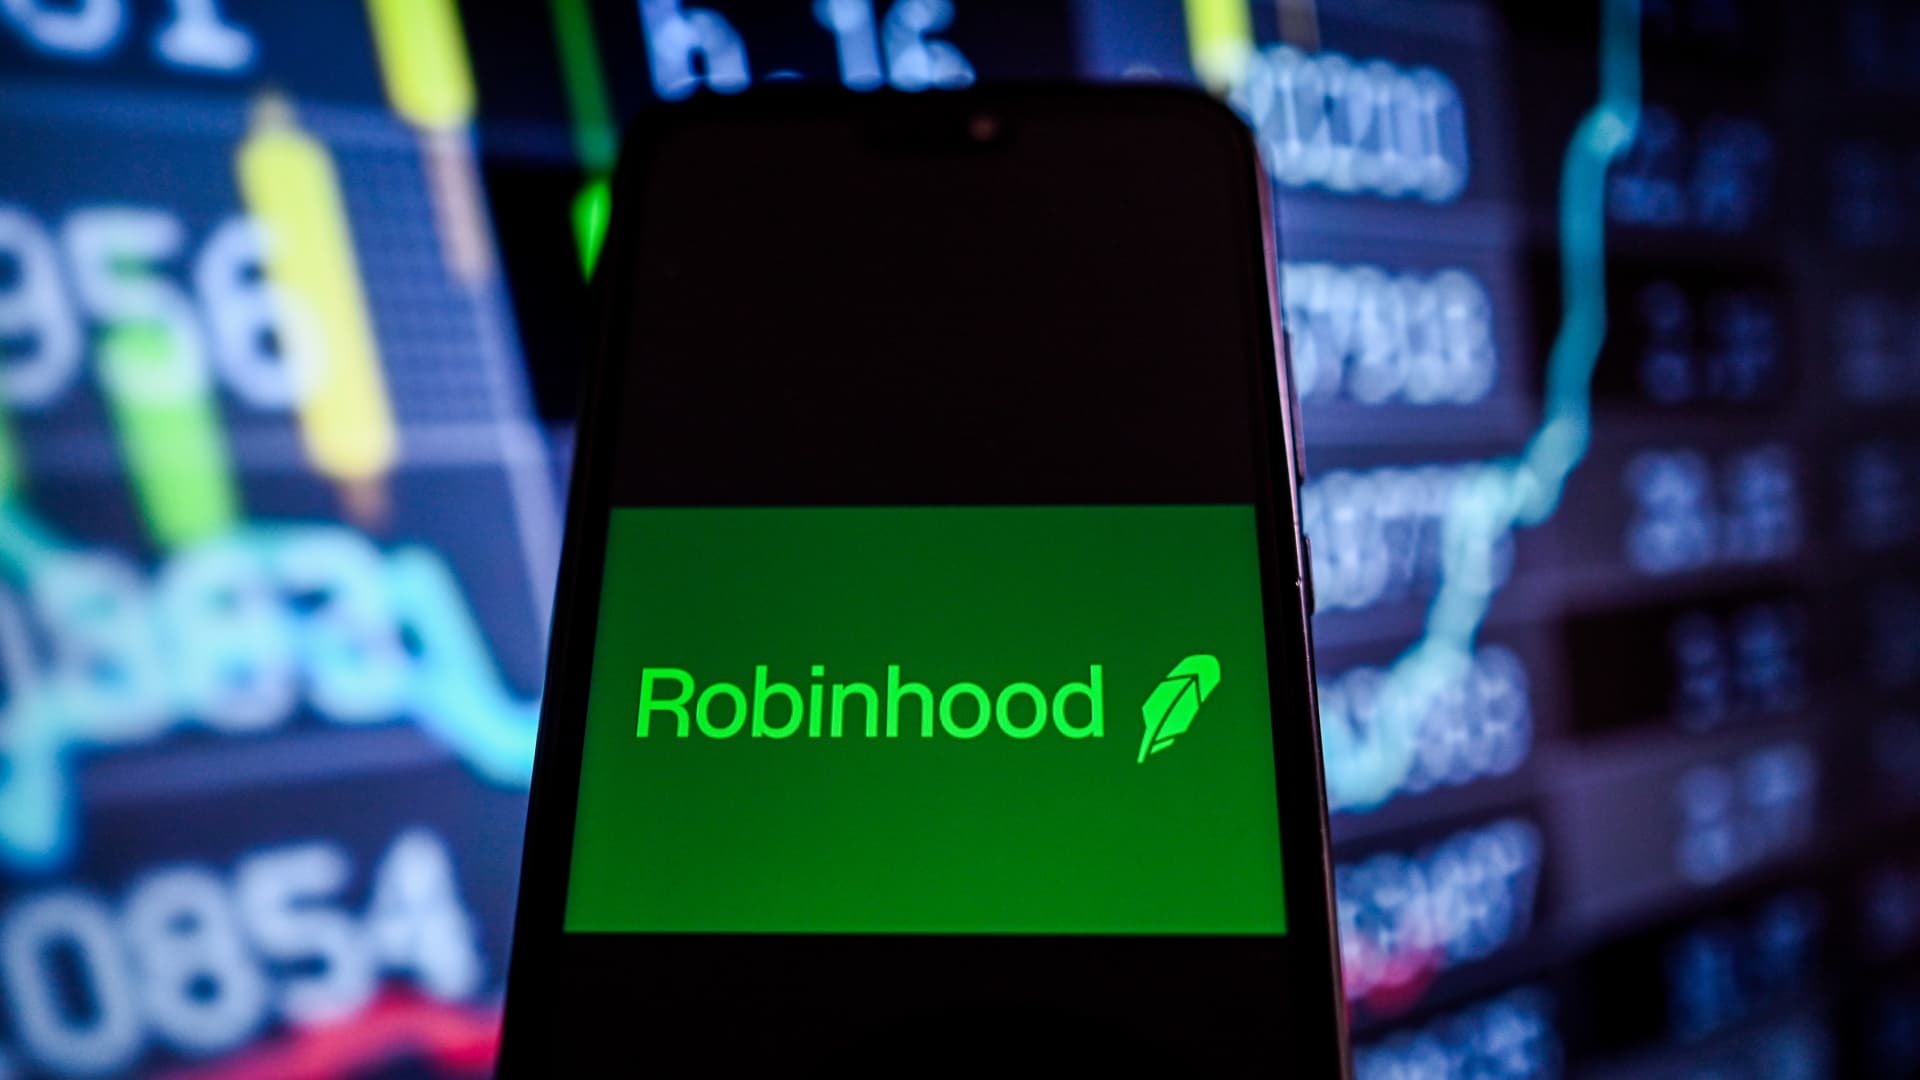 Robinhood says SEC could pursue enforcement actions over its crypto operations